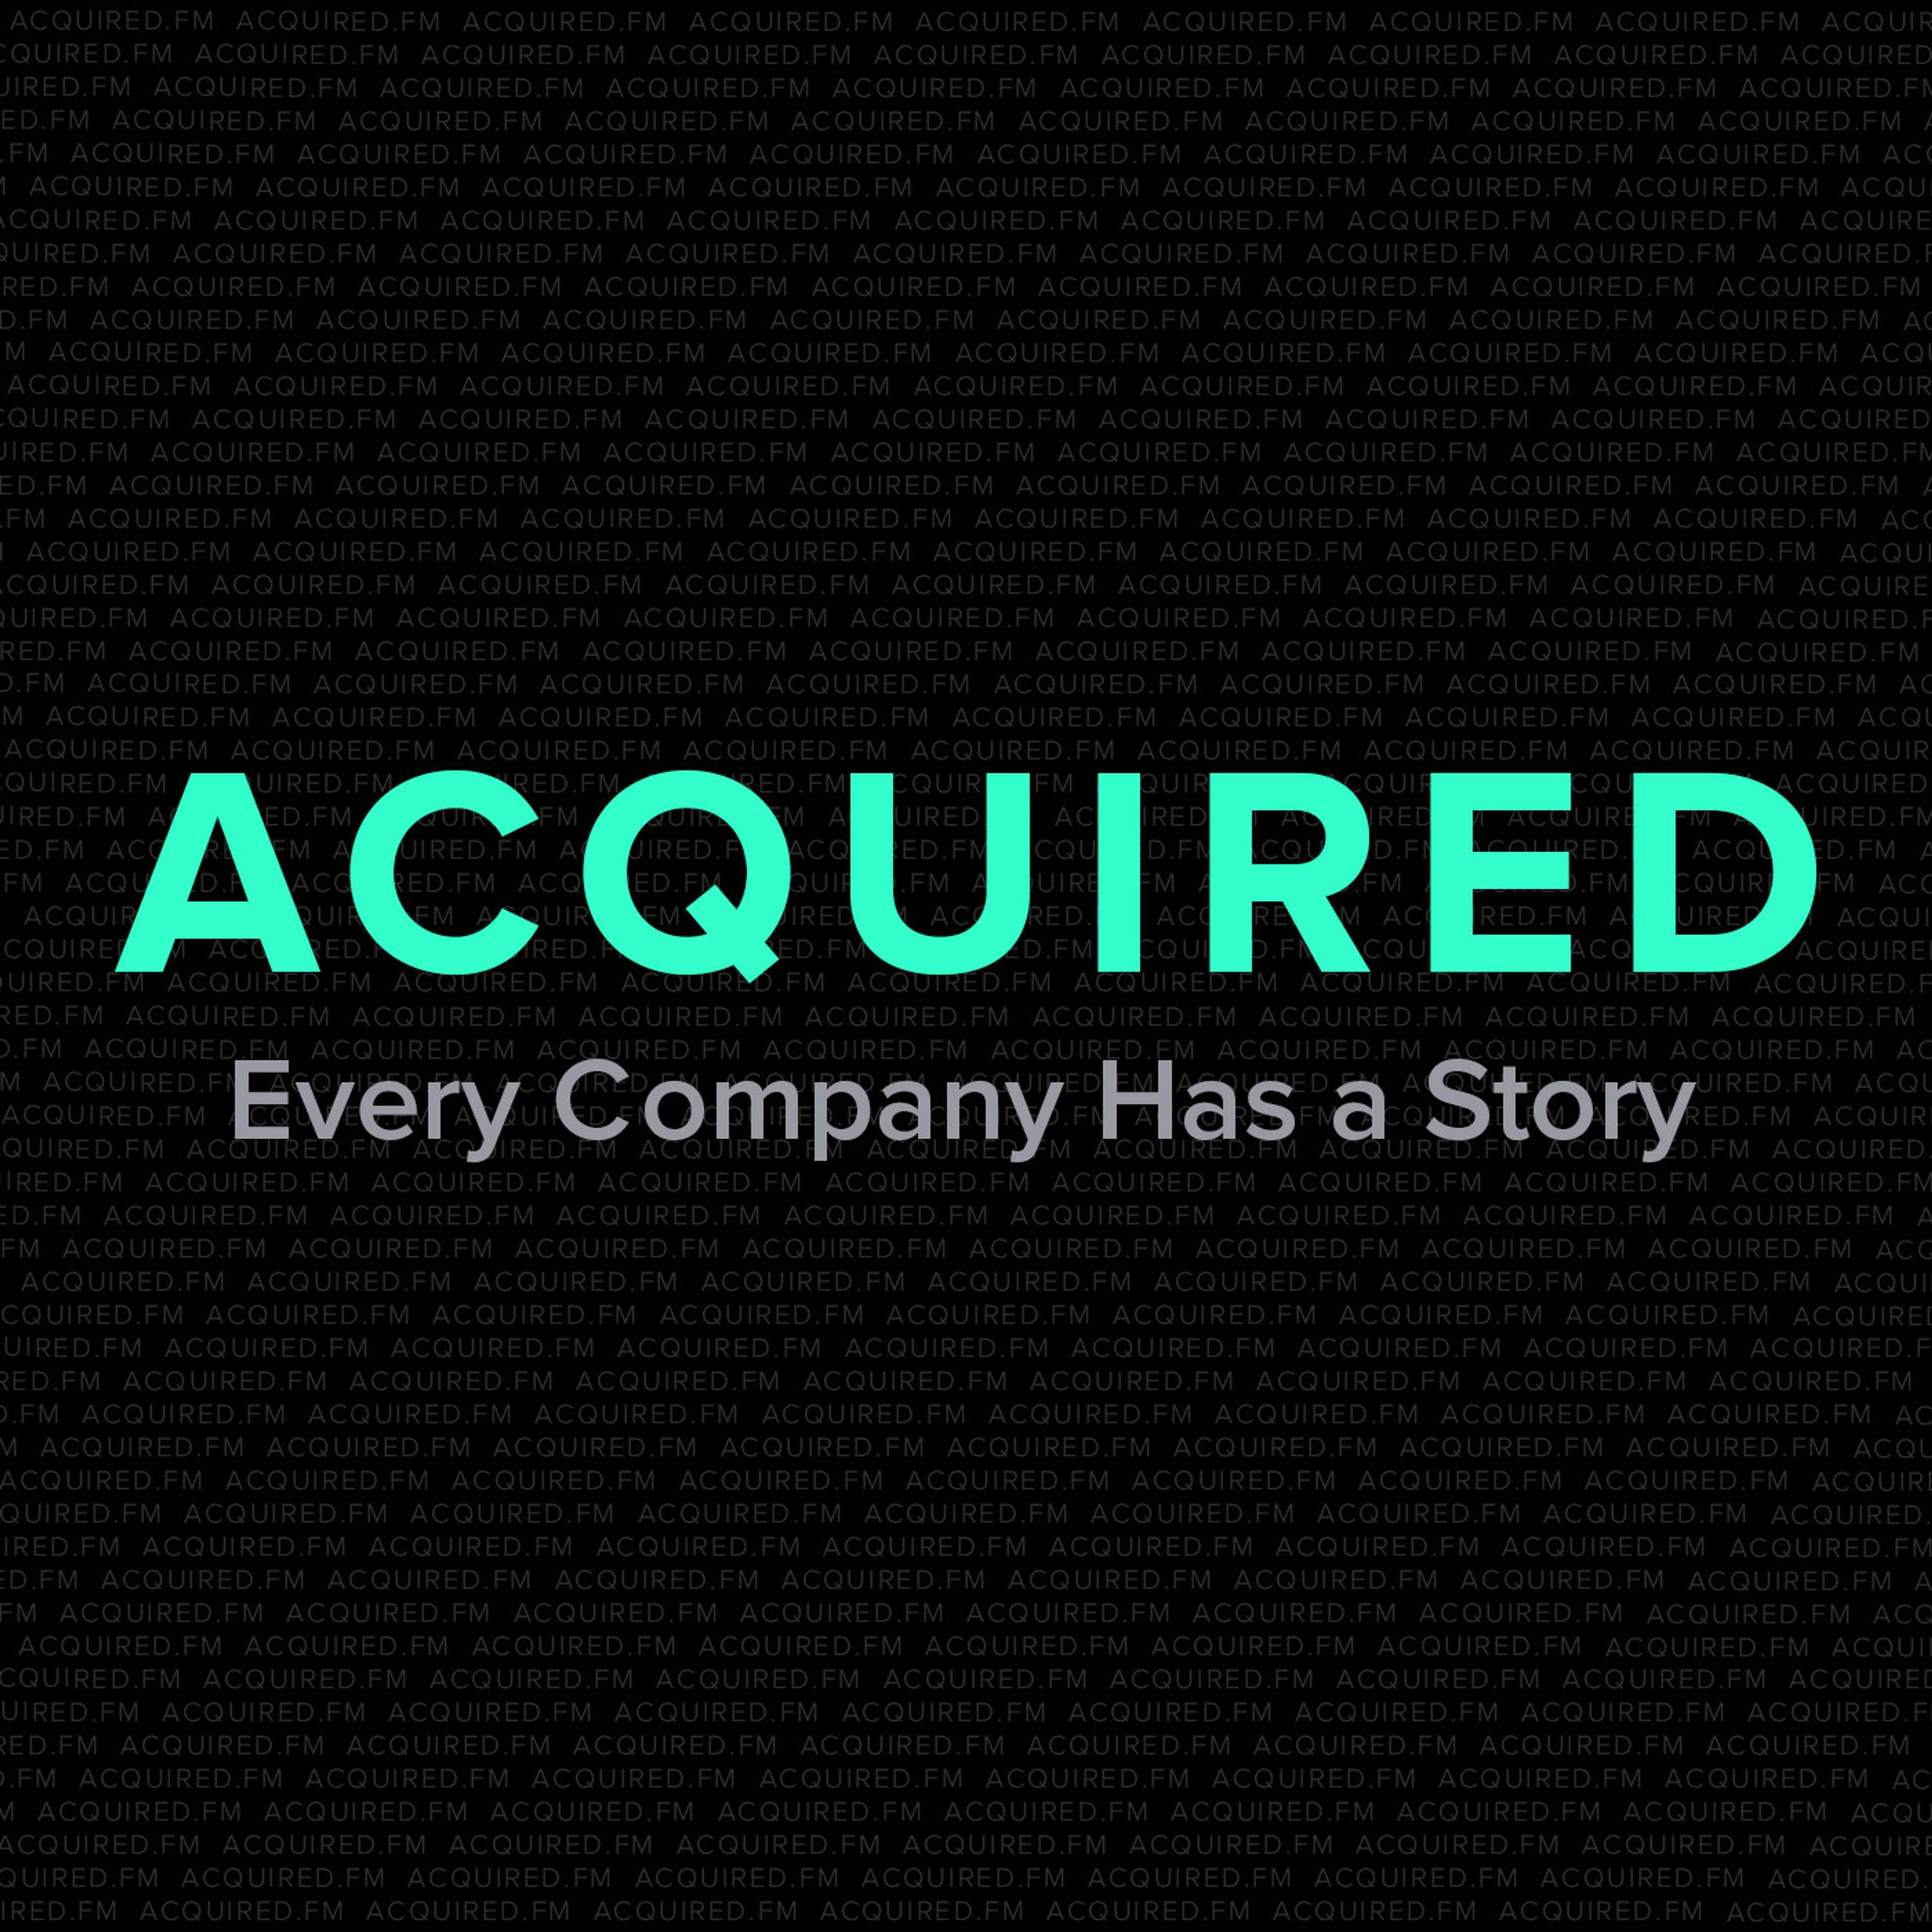 Episode 18: Special—An Acquirer’s View into M&A with Taylor Barada, head of Corp Dev at Adobe